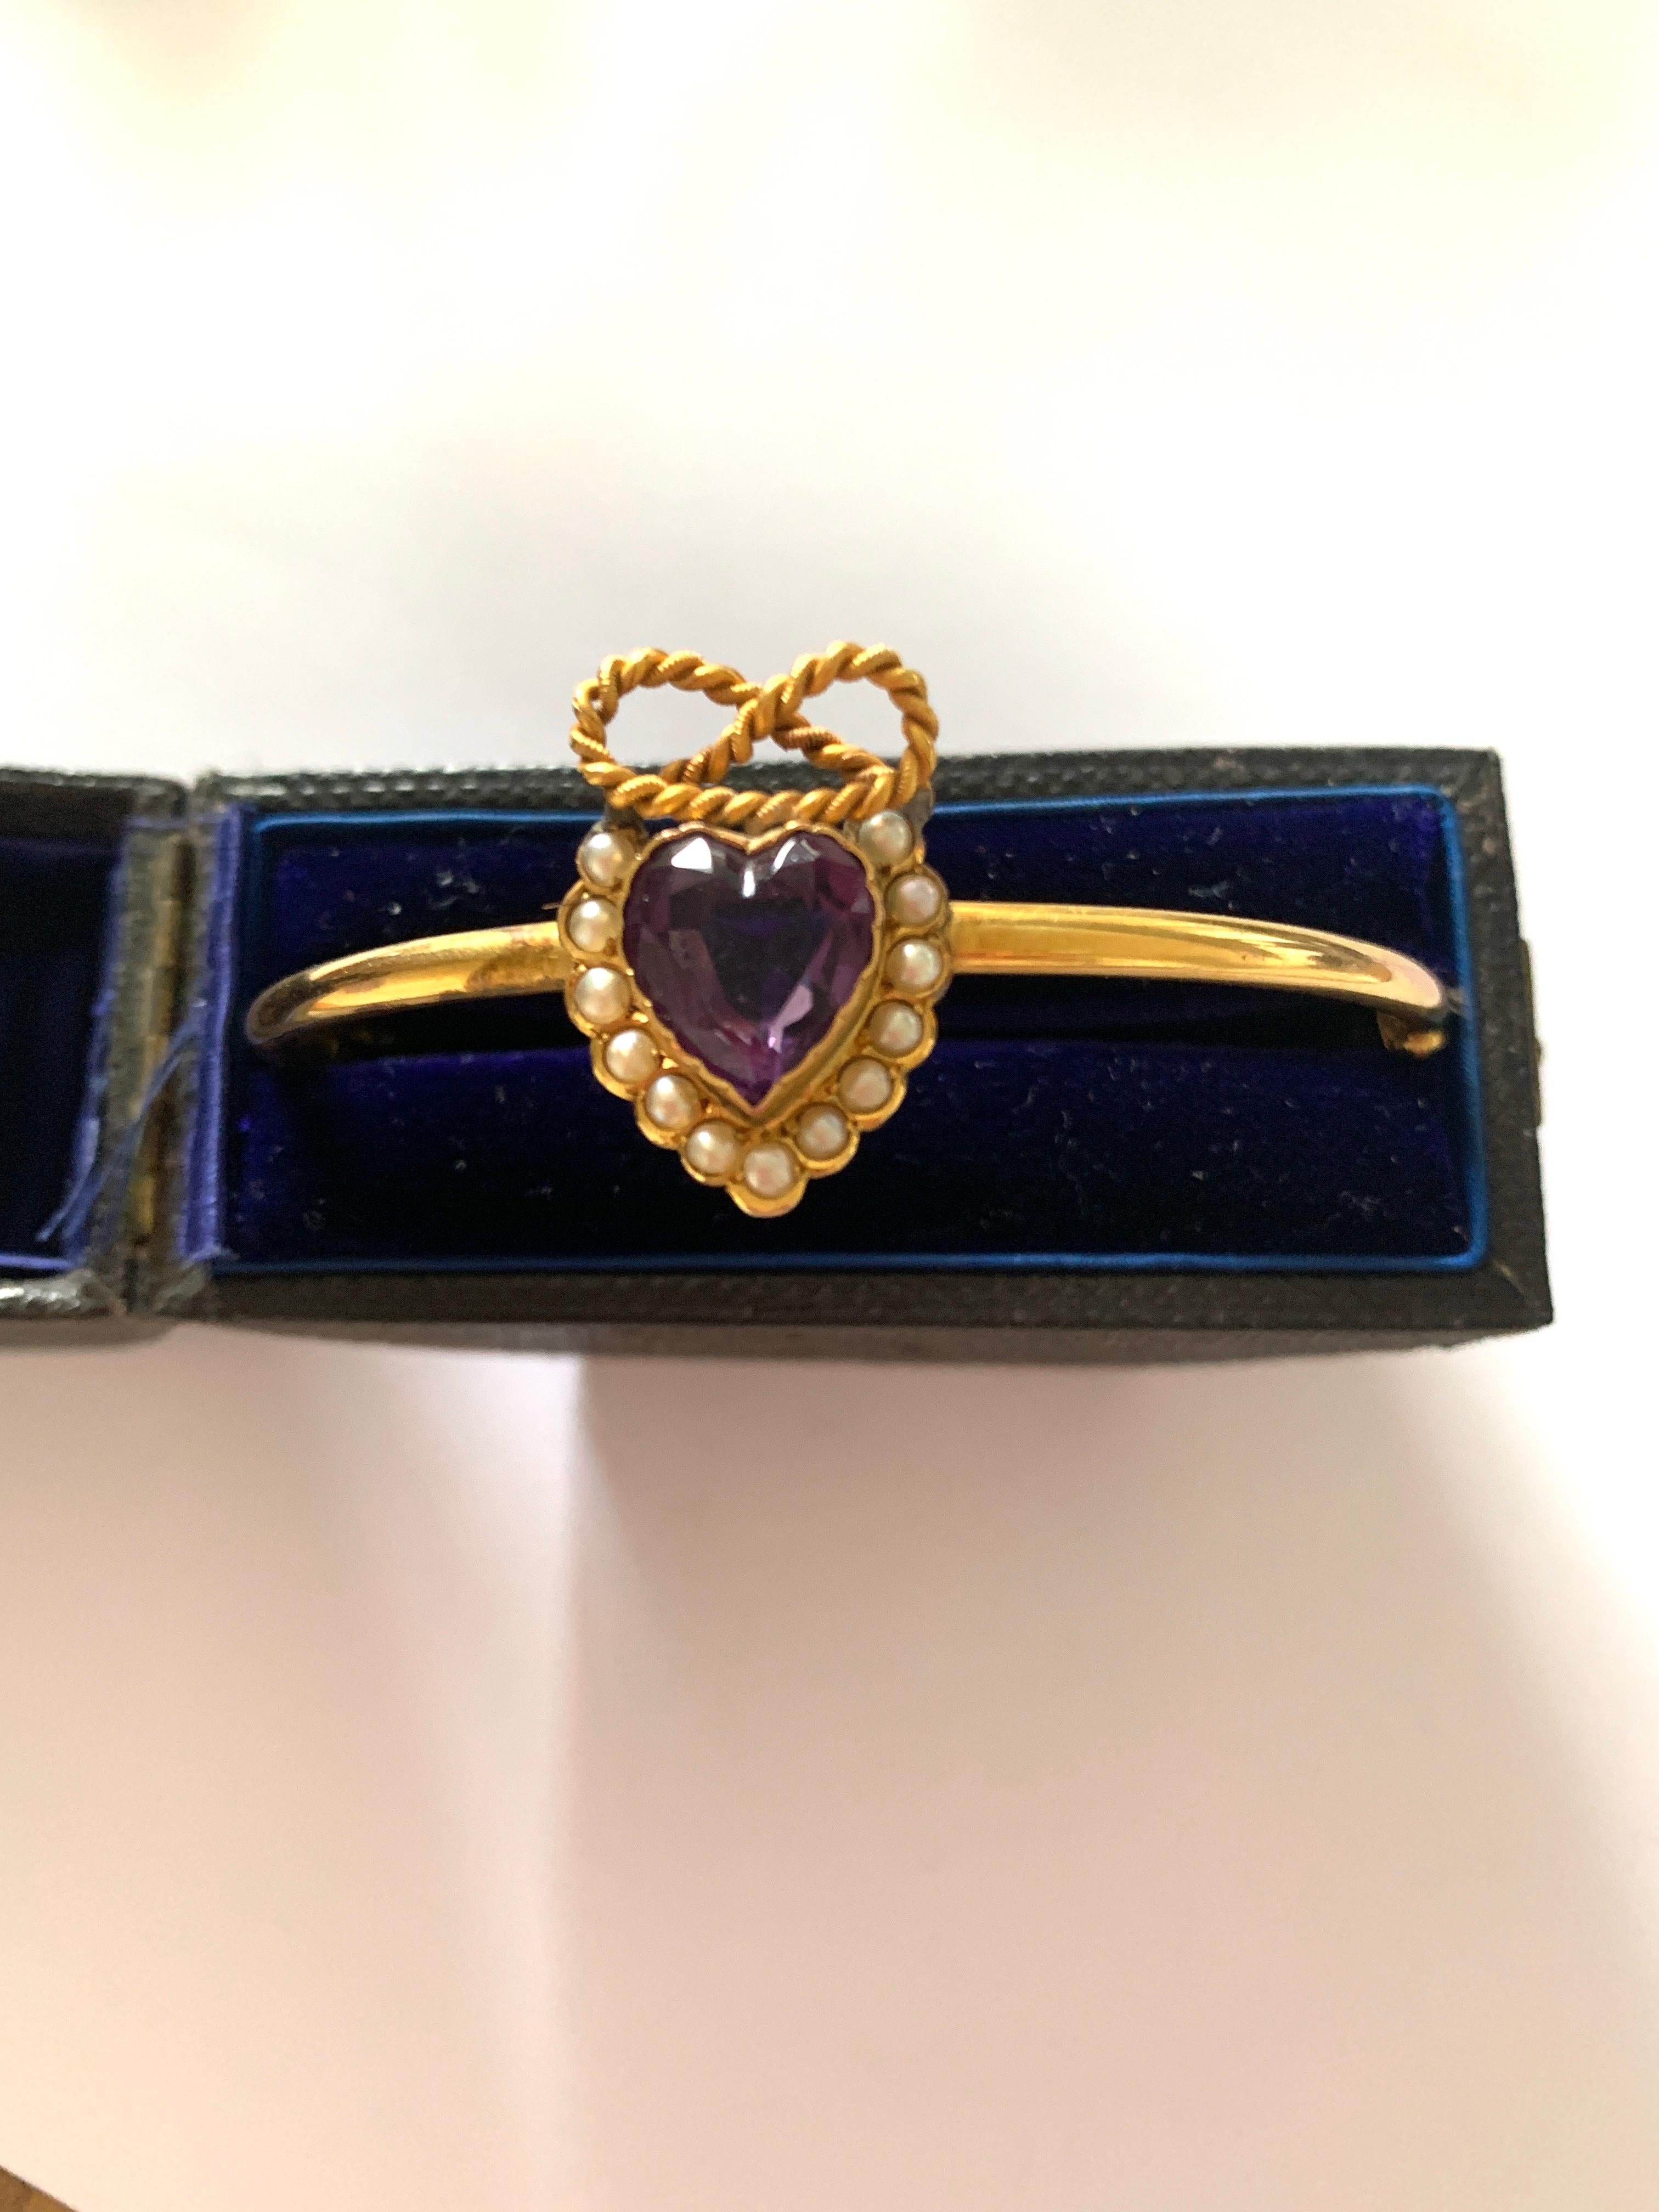 Antique Victorian Circa late 1800's
9ct Gold Sweet heart Bracelet
decorated with a heart shaped amethyst stone 
surrounded by freshwater seed pearls
Finished by a beautiful rope bow.

Supplied in Box shown. - possibly the original box !

Bangle